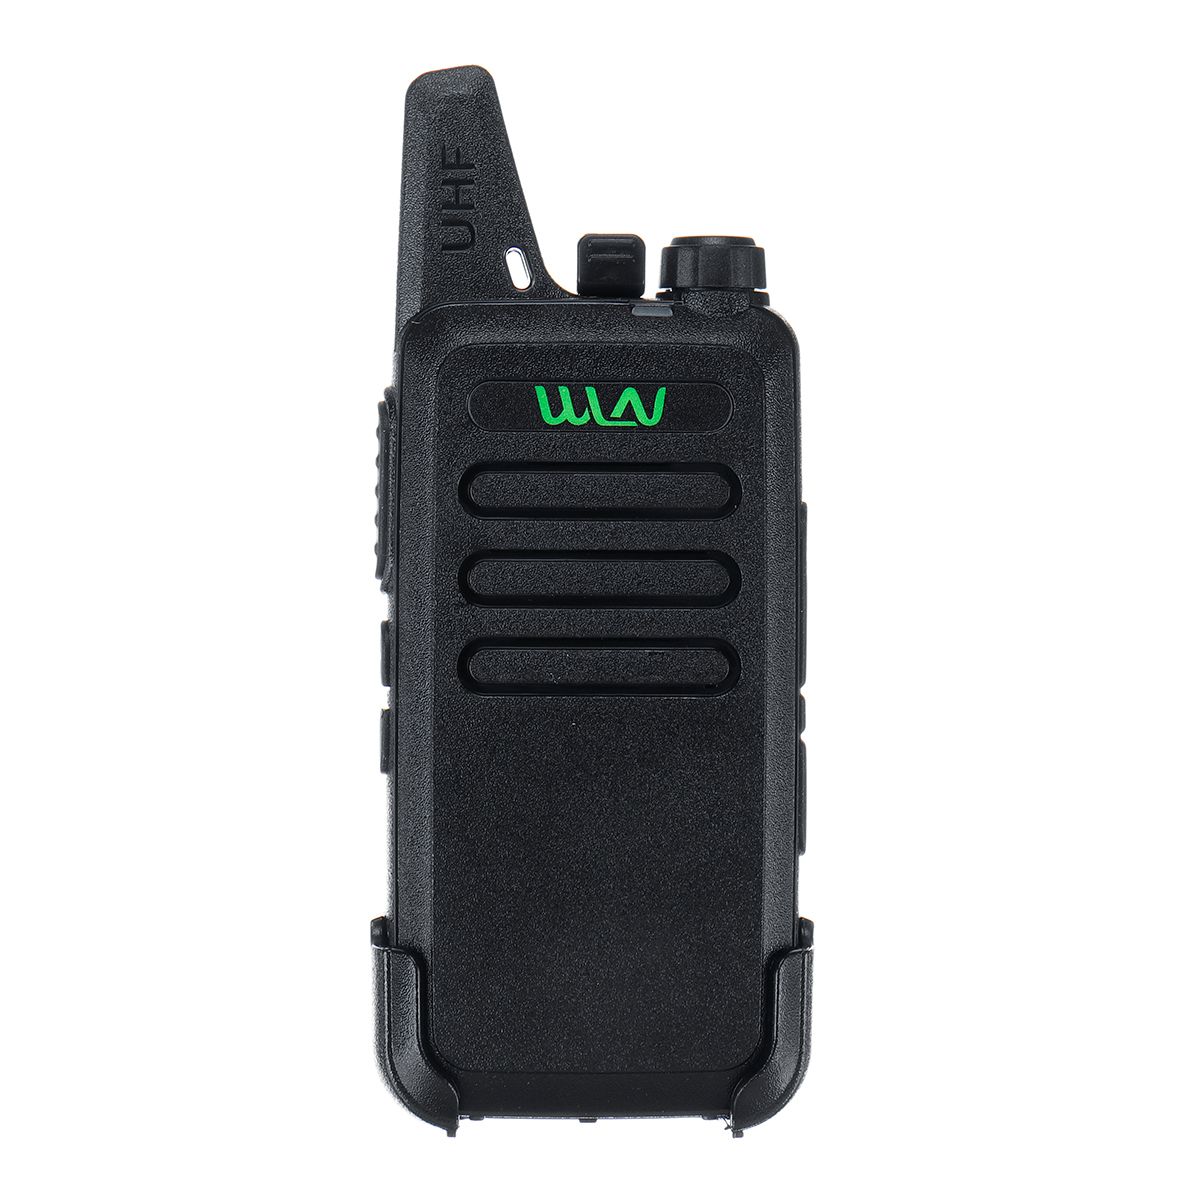 Rechargeable-16-Channel-3-5km-Walkie-Talkie-Slight-Outdoor-Hiking-Toys-for-Kids-1548330